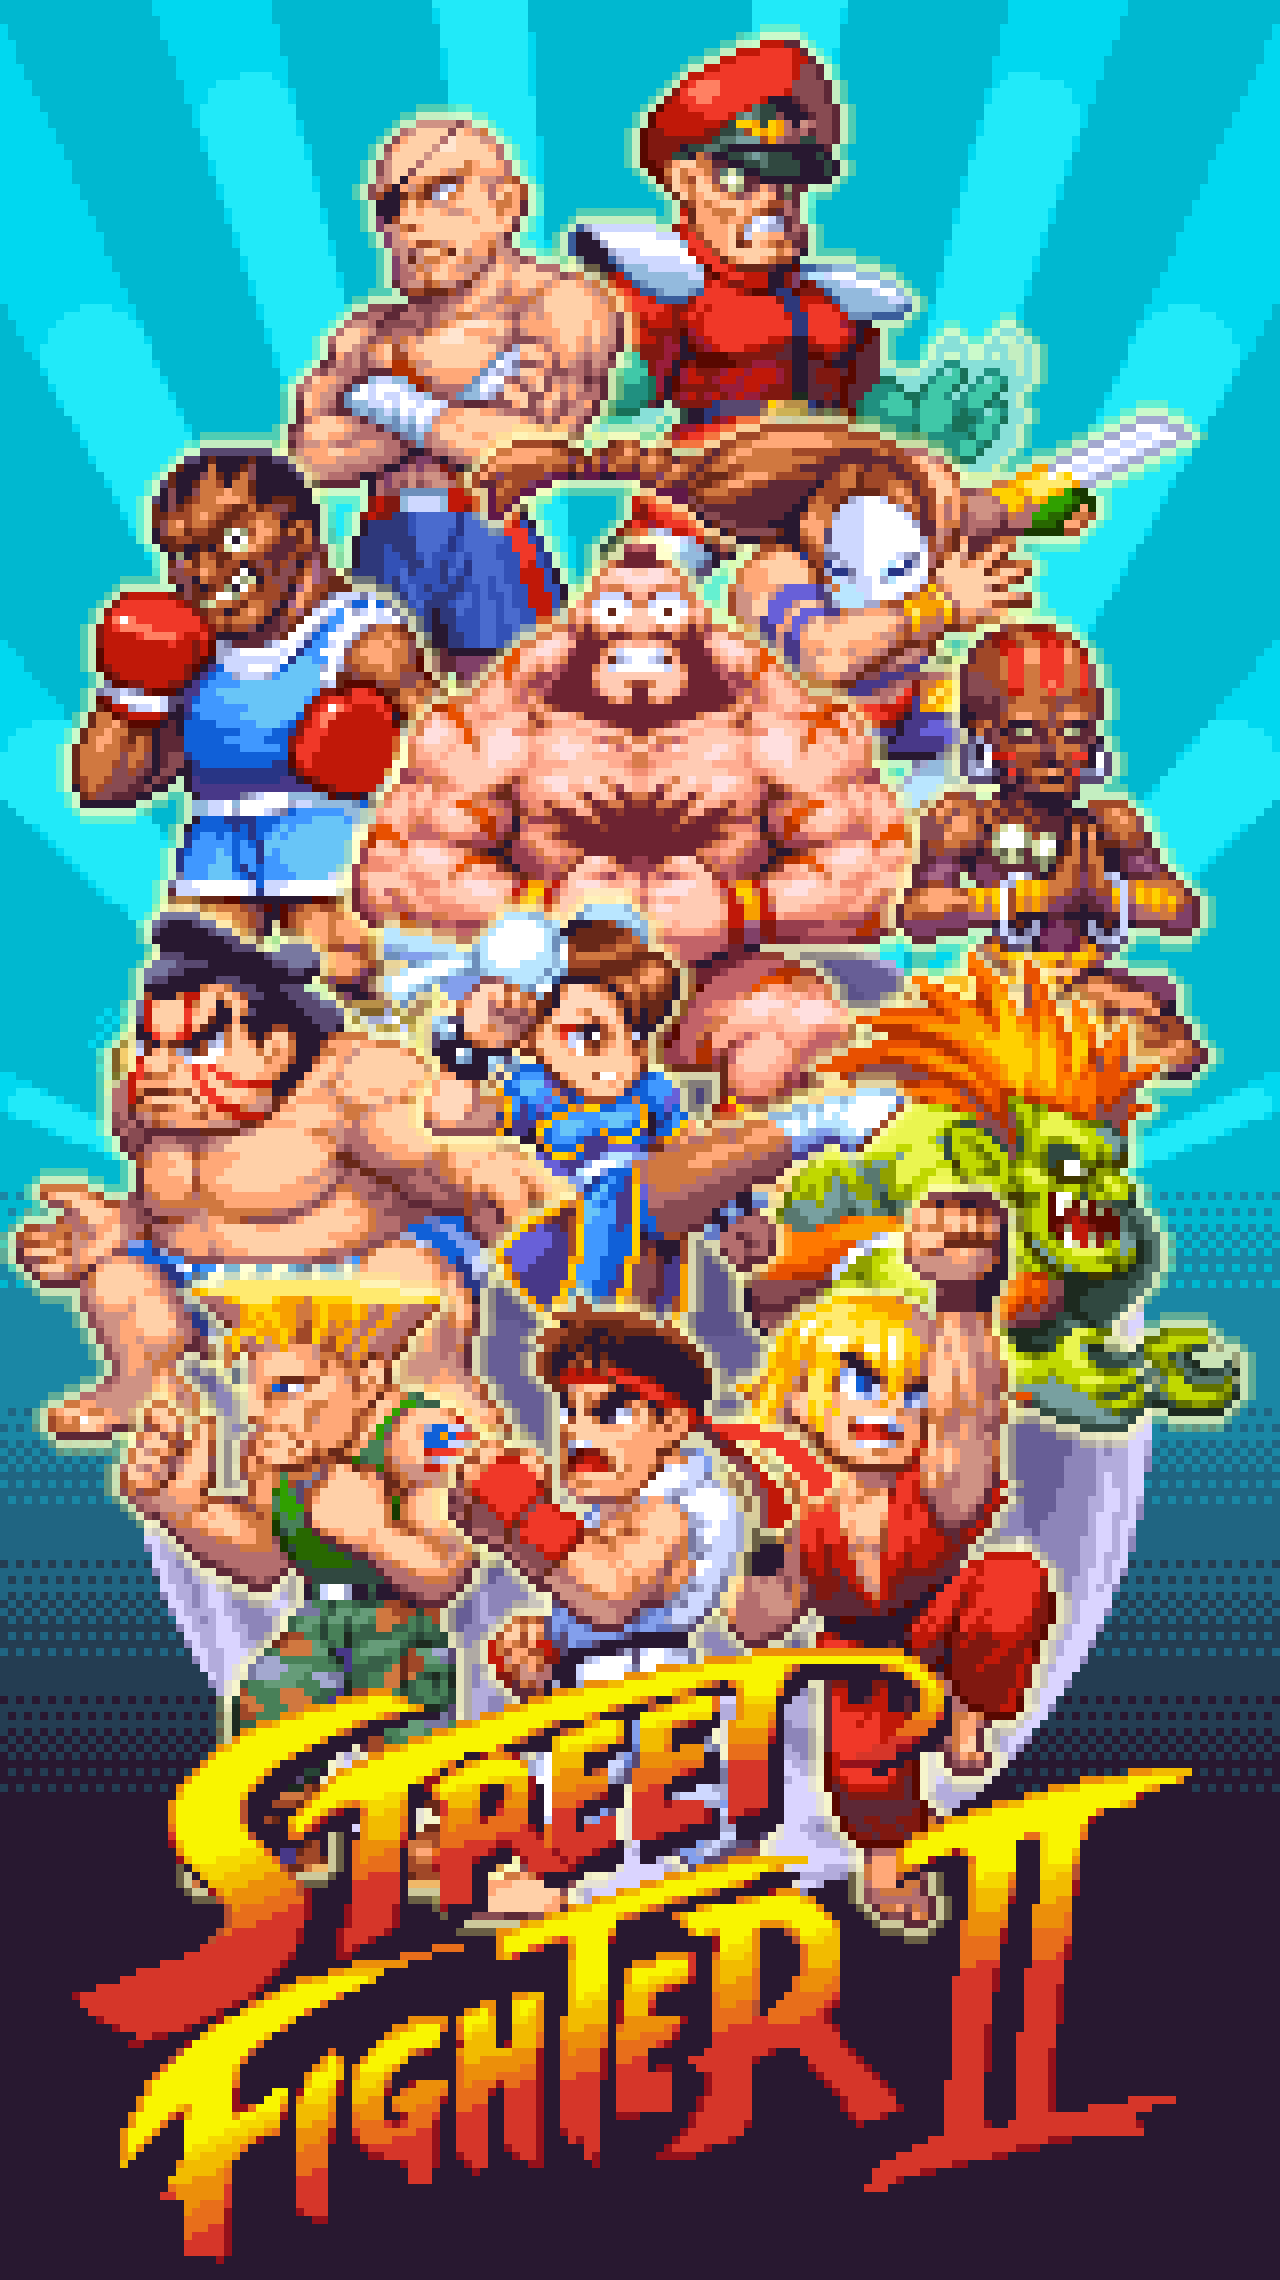 Final Fight Playable Characters by dollarcube on DeviantArt